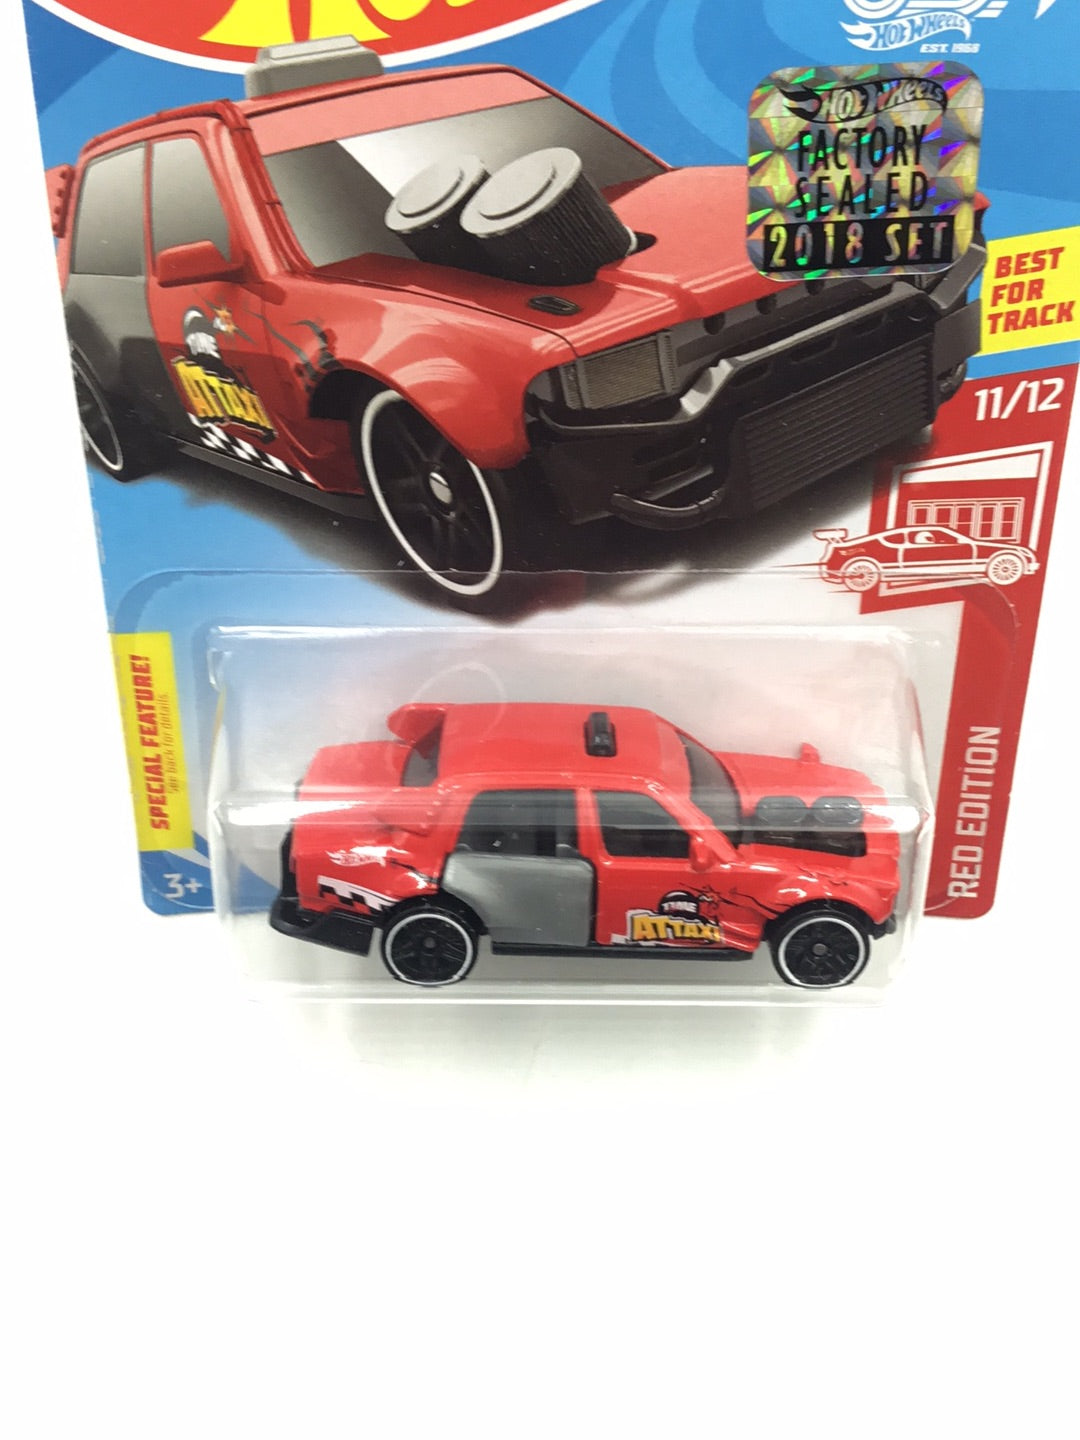 2018 hot wheels red edition #11 Time Attaxi target red factory sealed sticker